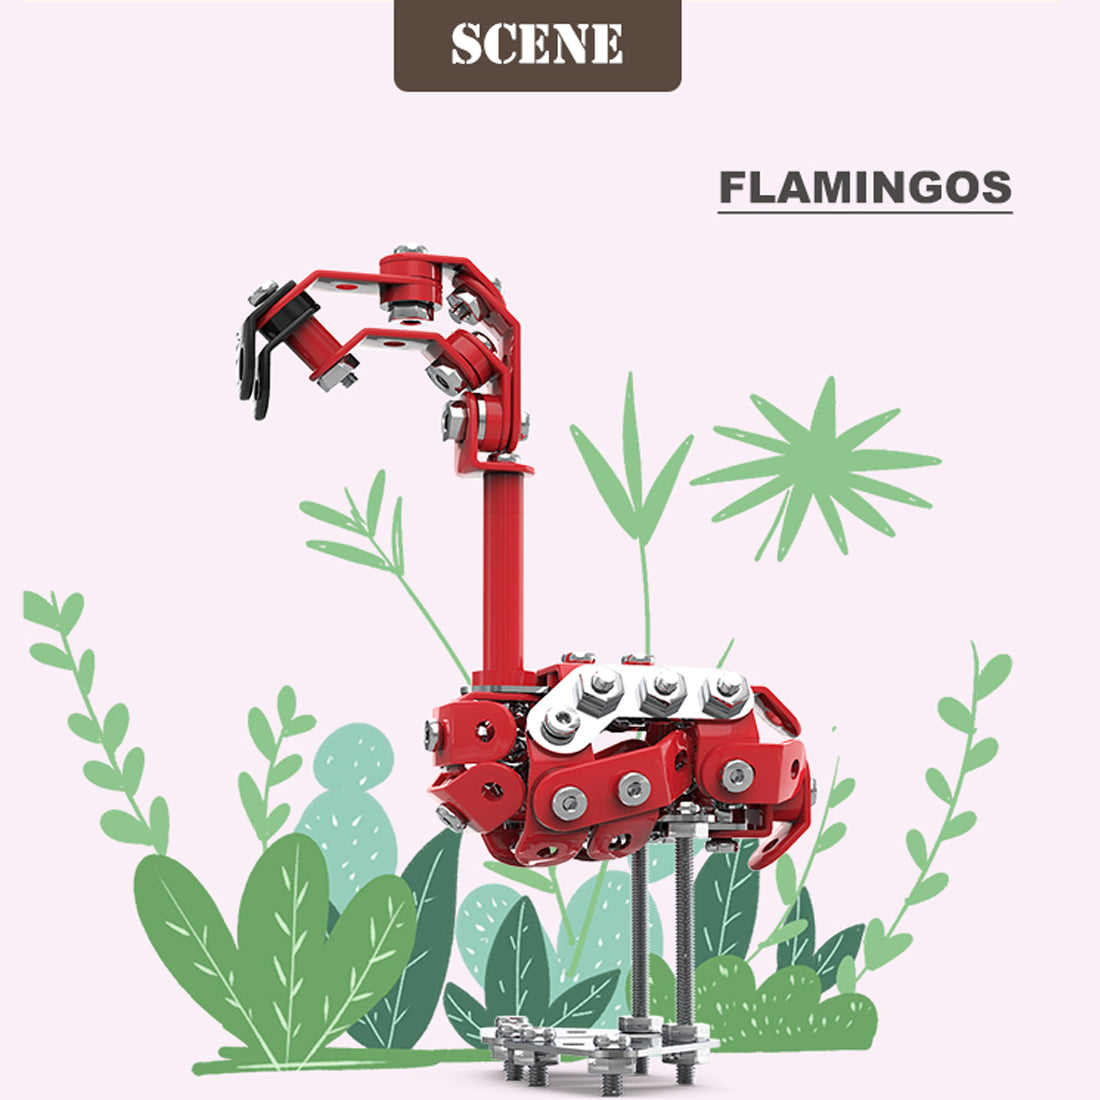 135Pcs Flamingo Assembly Model DIY Animal Puzzle Stainless Steel Screw Toys Kits